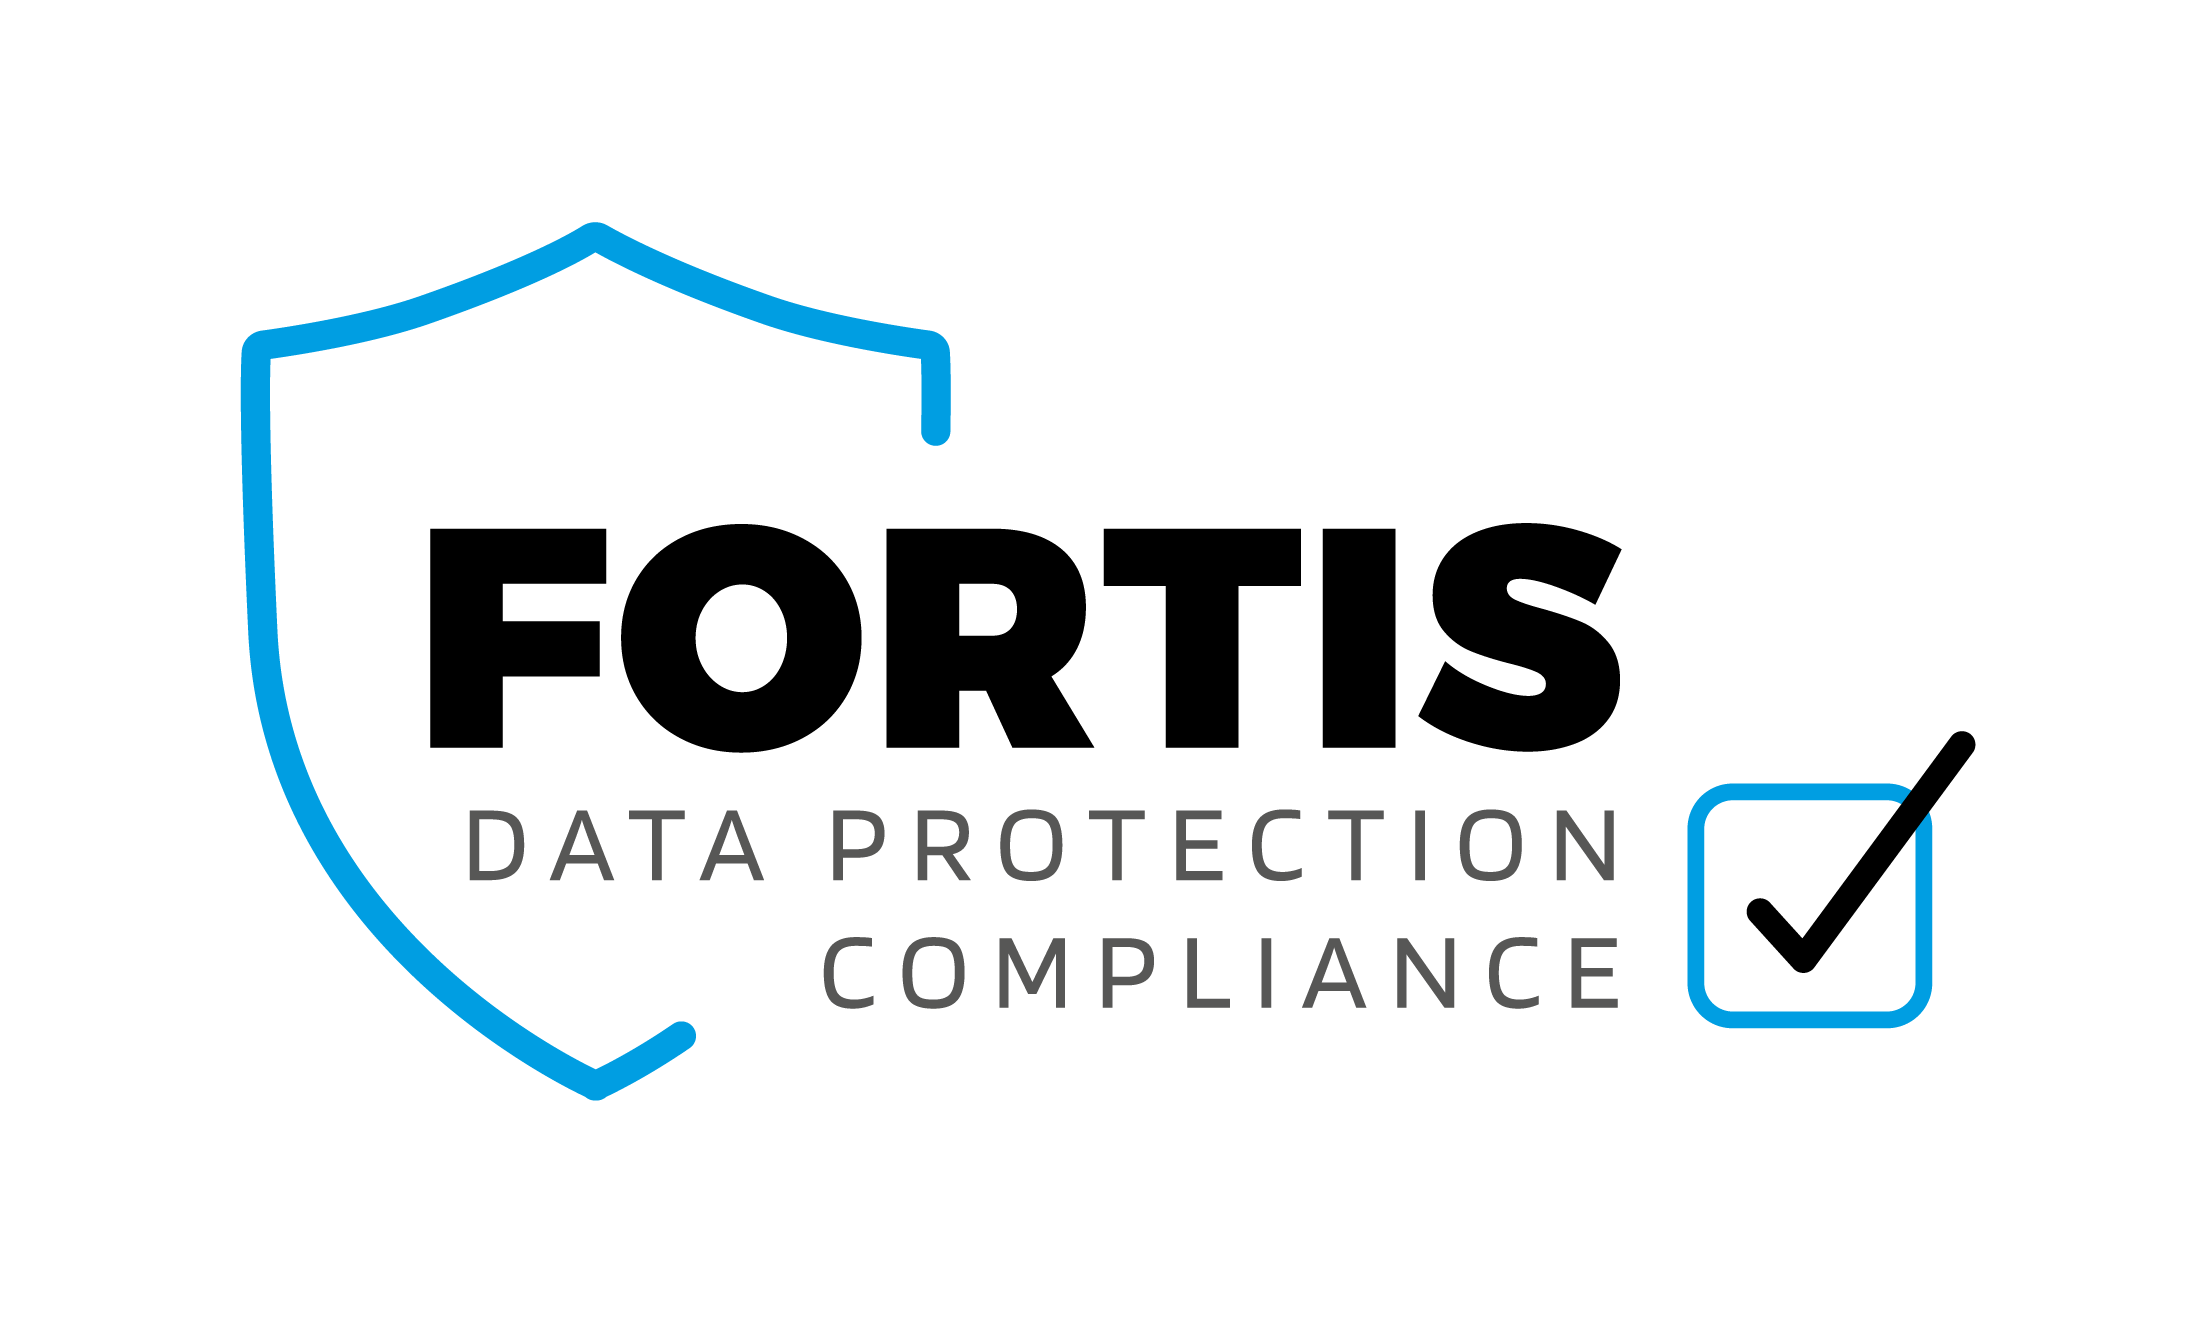 Fortis Data Protection Compliance